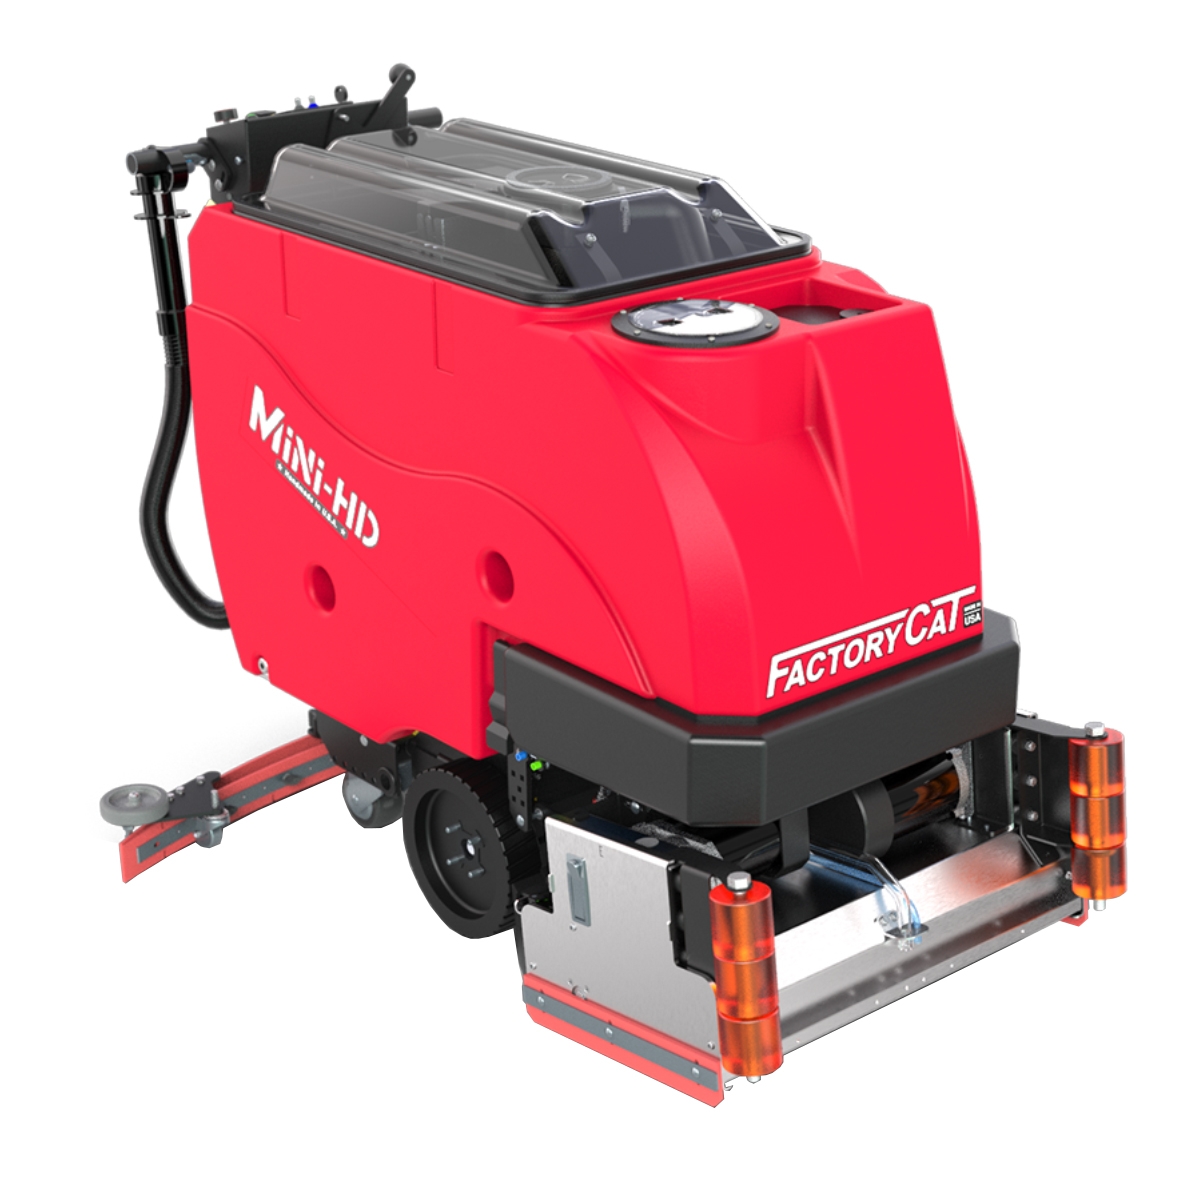 MINI-HD Floor Scrubber is easy to maneuver into tight areas, and simple to service. The deck is protected by steel guards and large polyurethane rollers to keep the unit from marking walls.